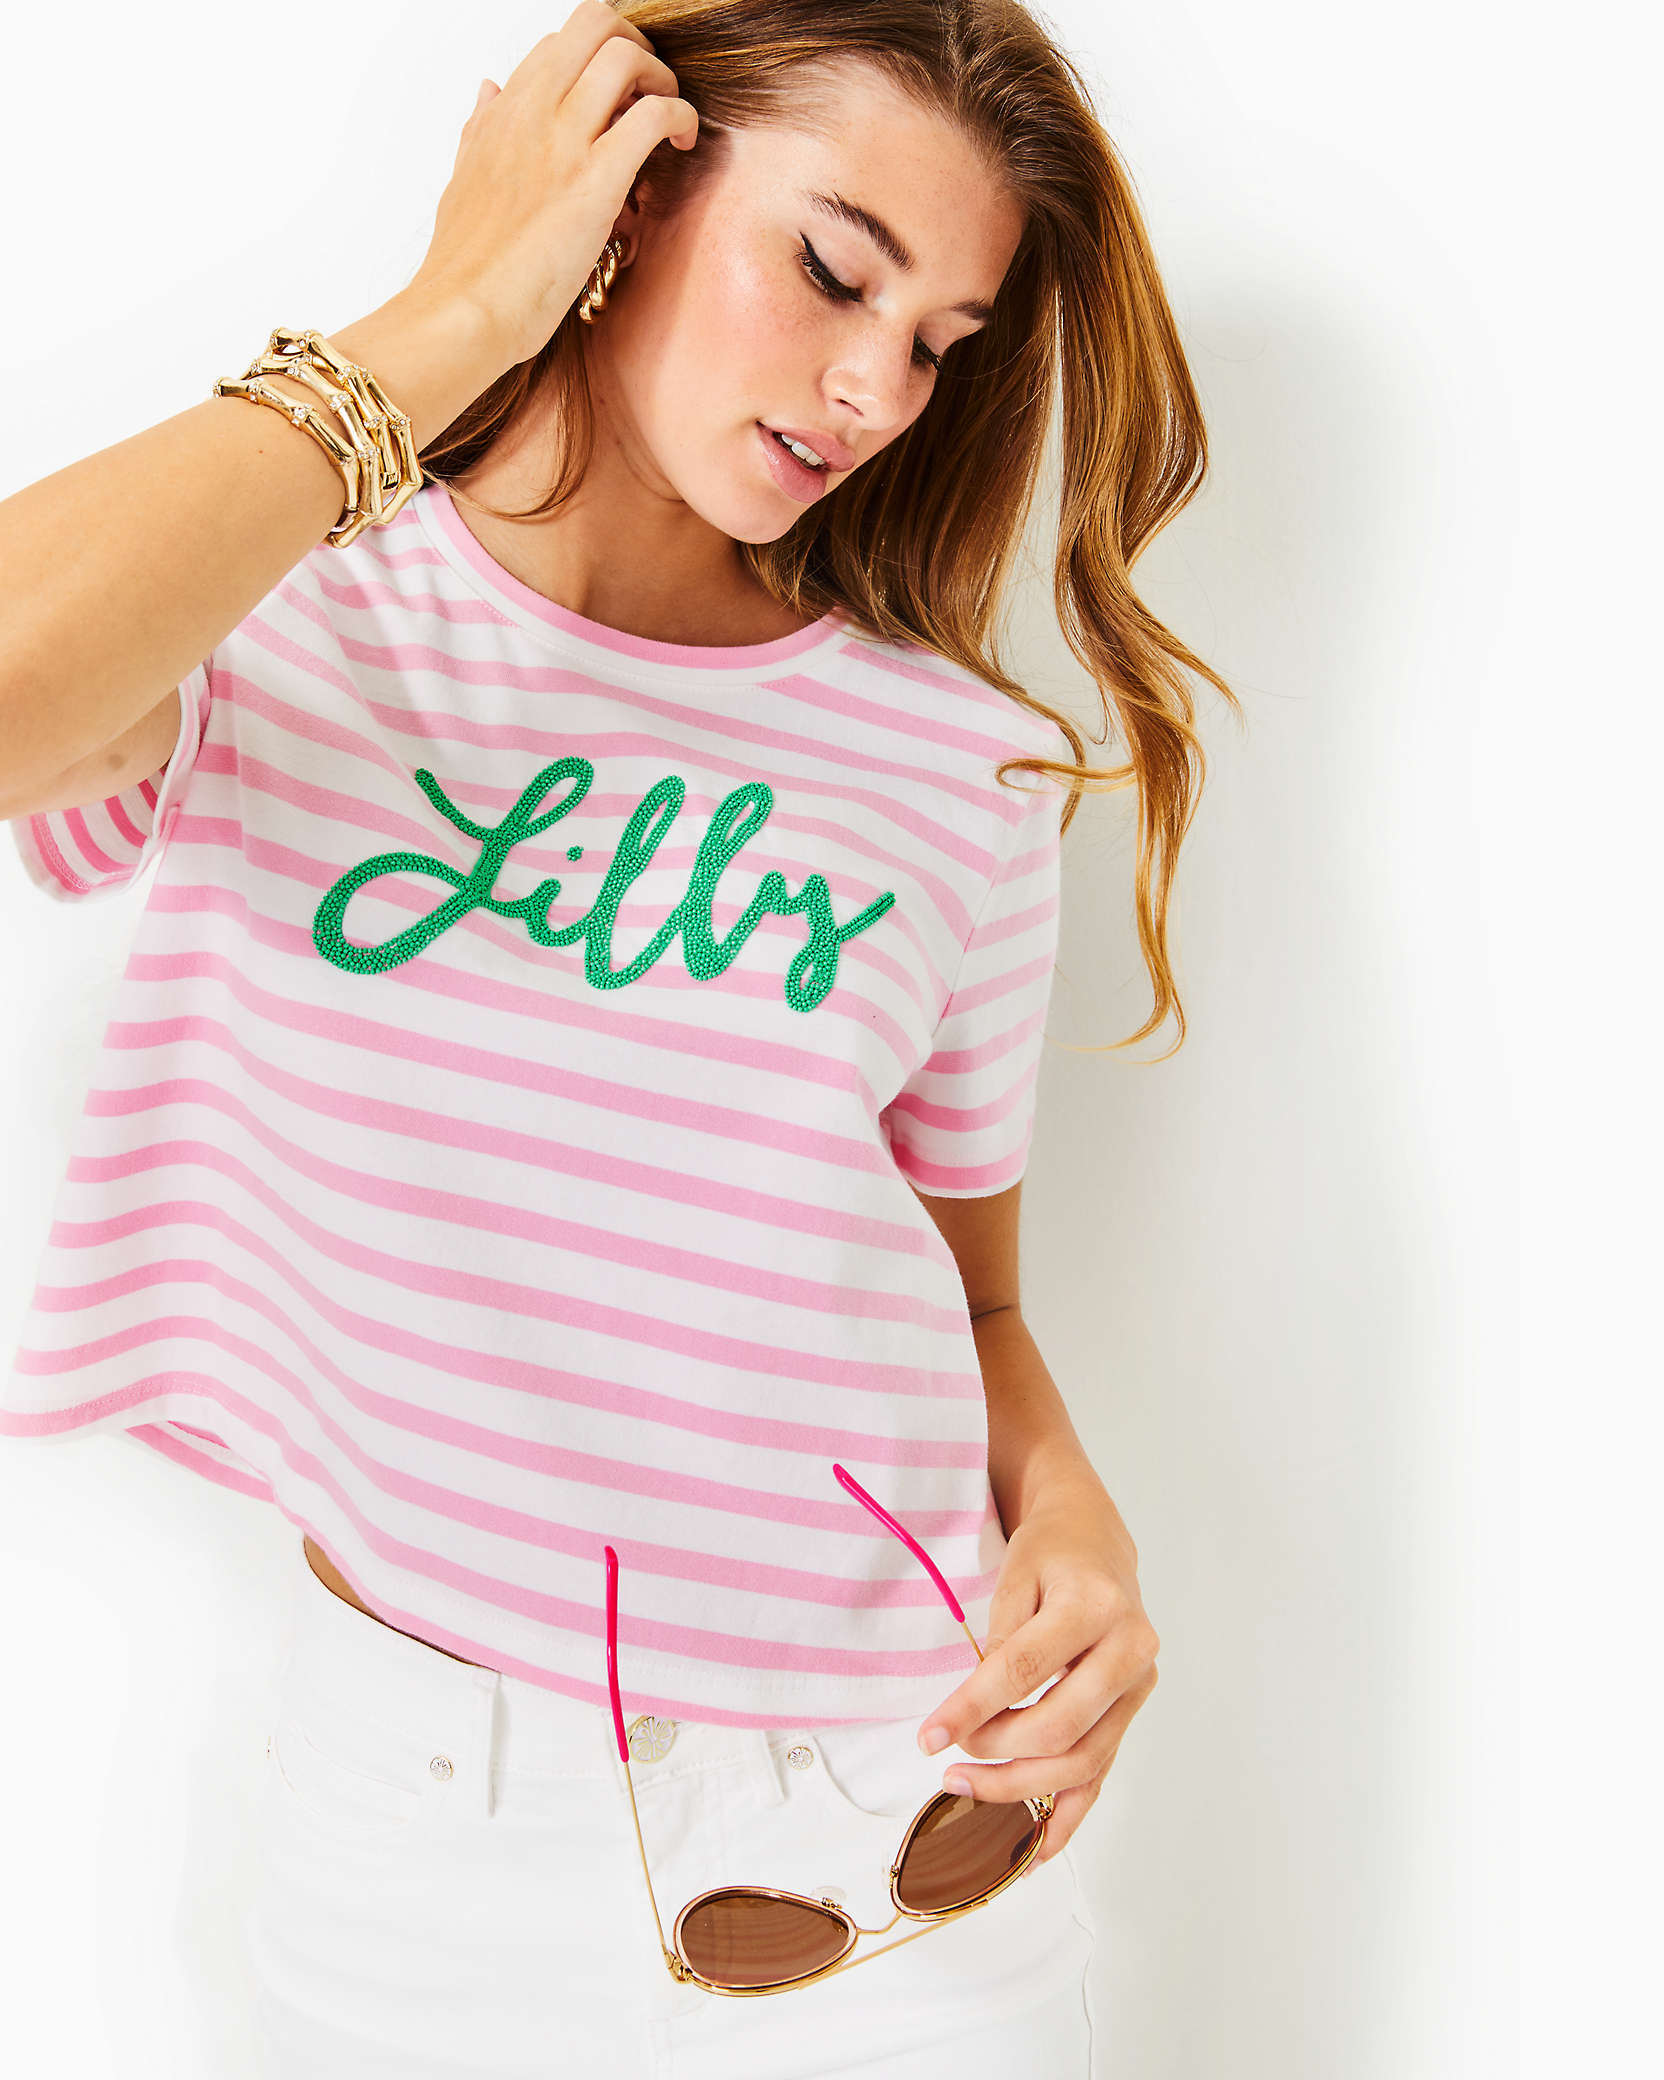 Lilly Pulitzer Keenan Cropped Cotton Top In Conch Shell Pink Striped  Embellished Top